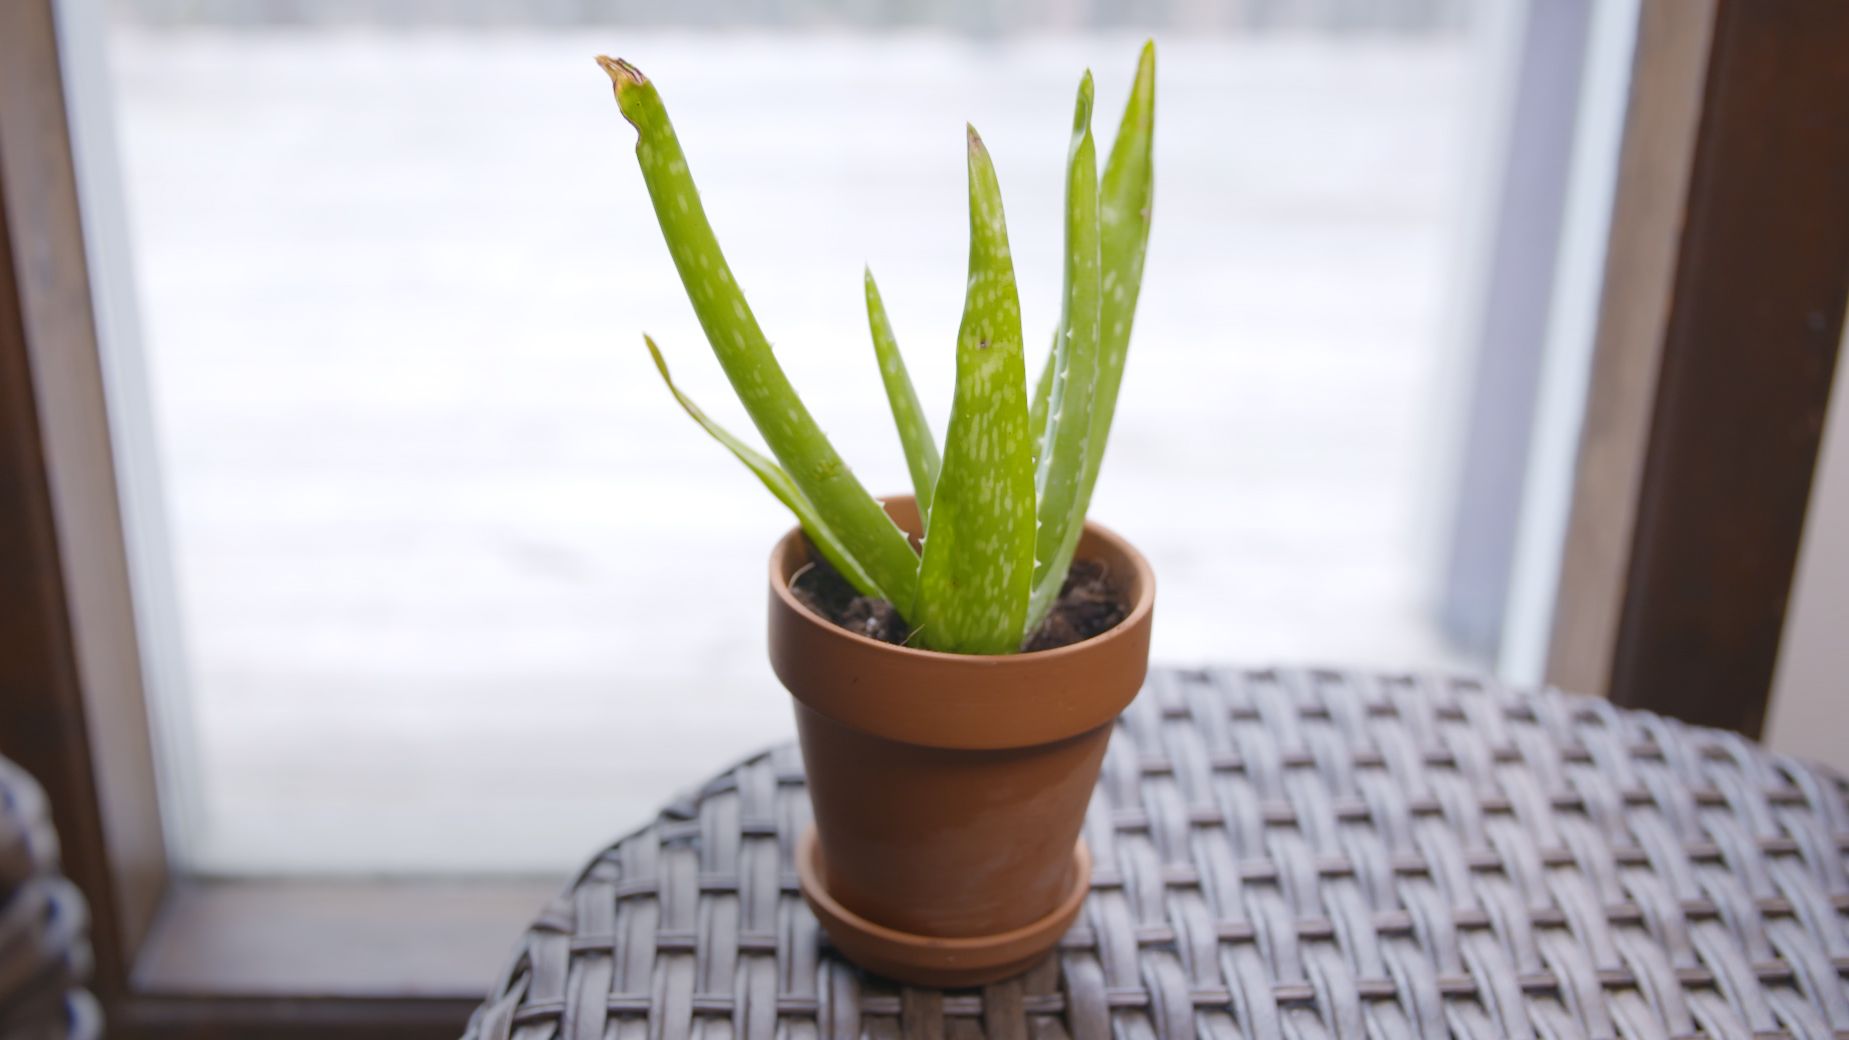 How To Store Aloe Vera Leaf At Home